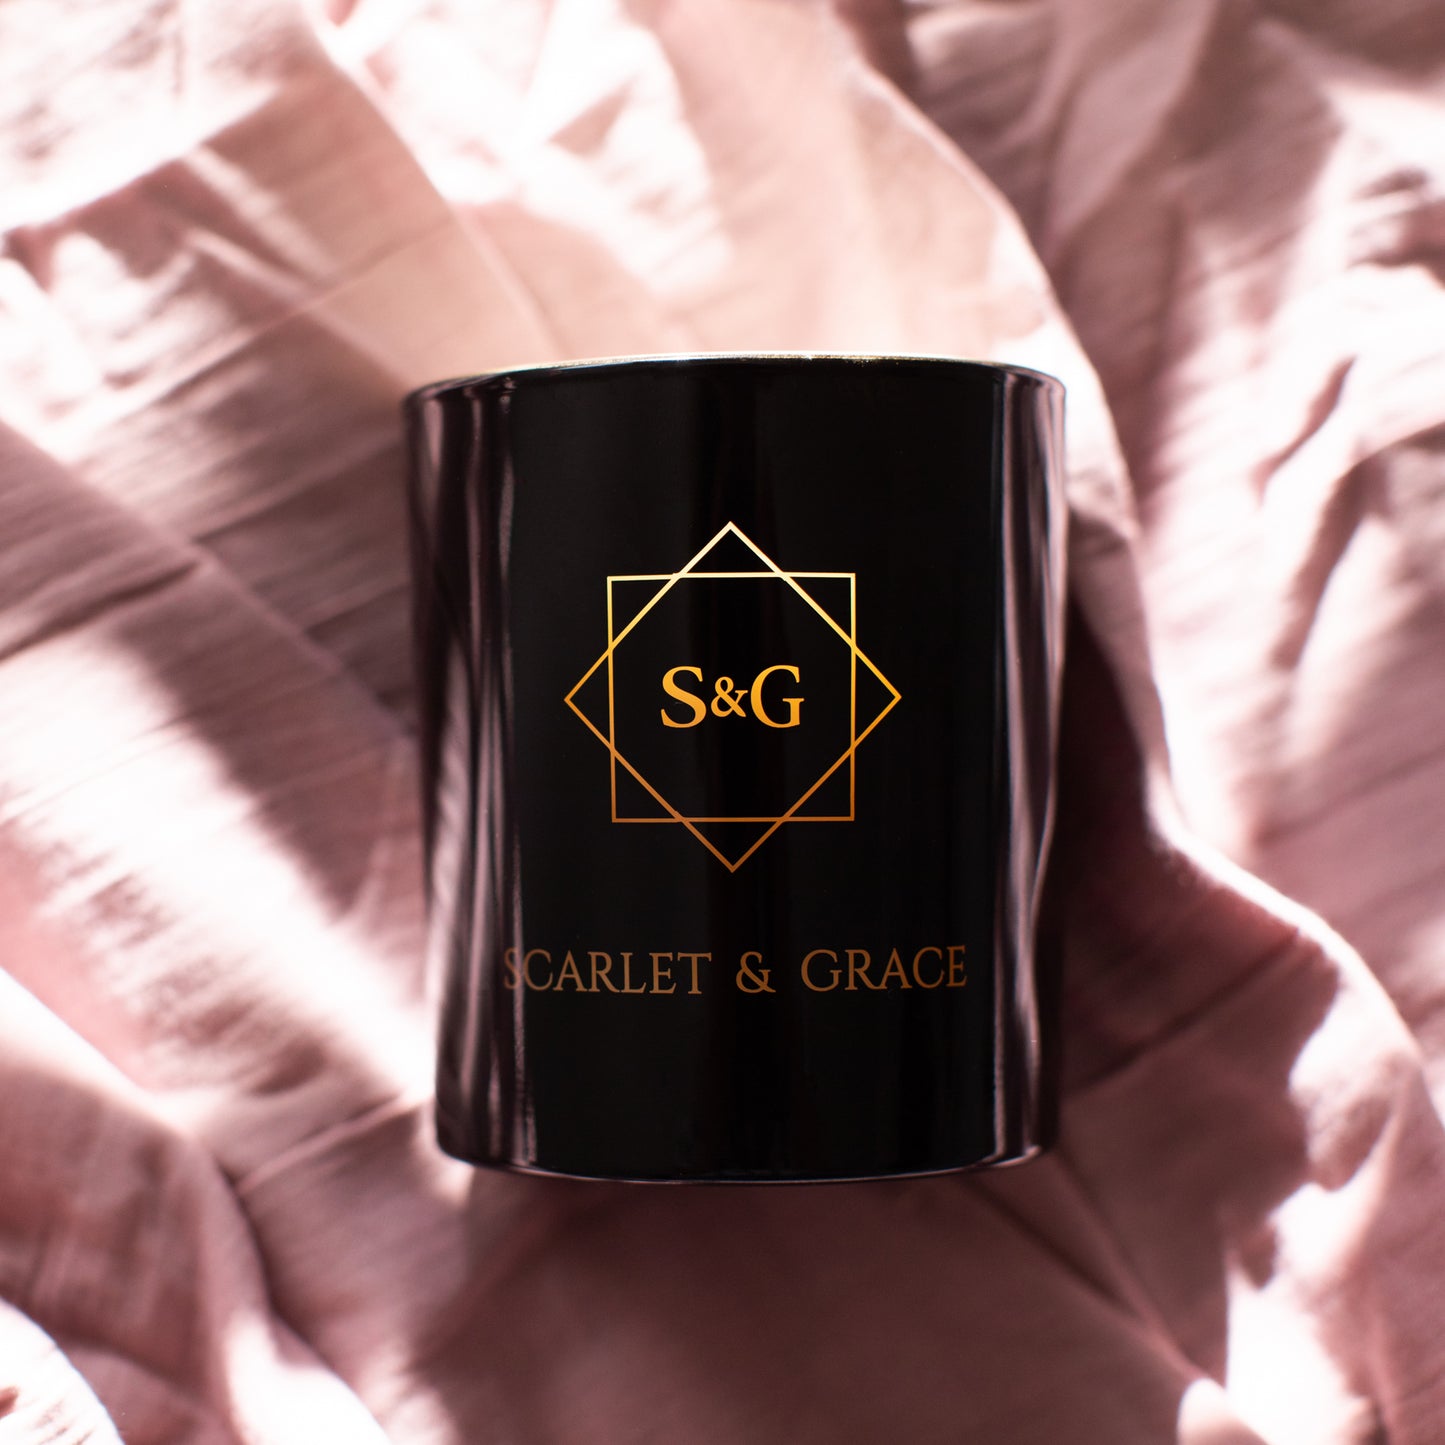 GWH X S&G LIMITED EDITION CANDLE - Lotus Flower (340G Soy Wax) - Scarlet & Grace